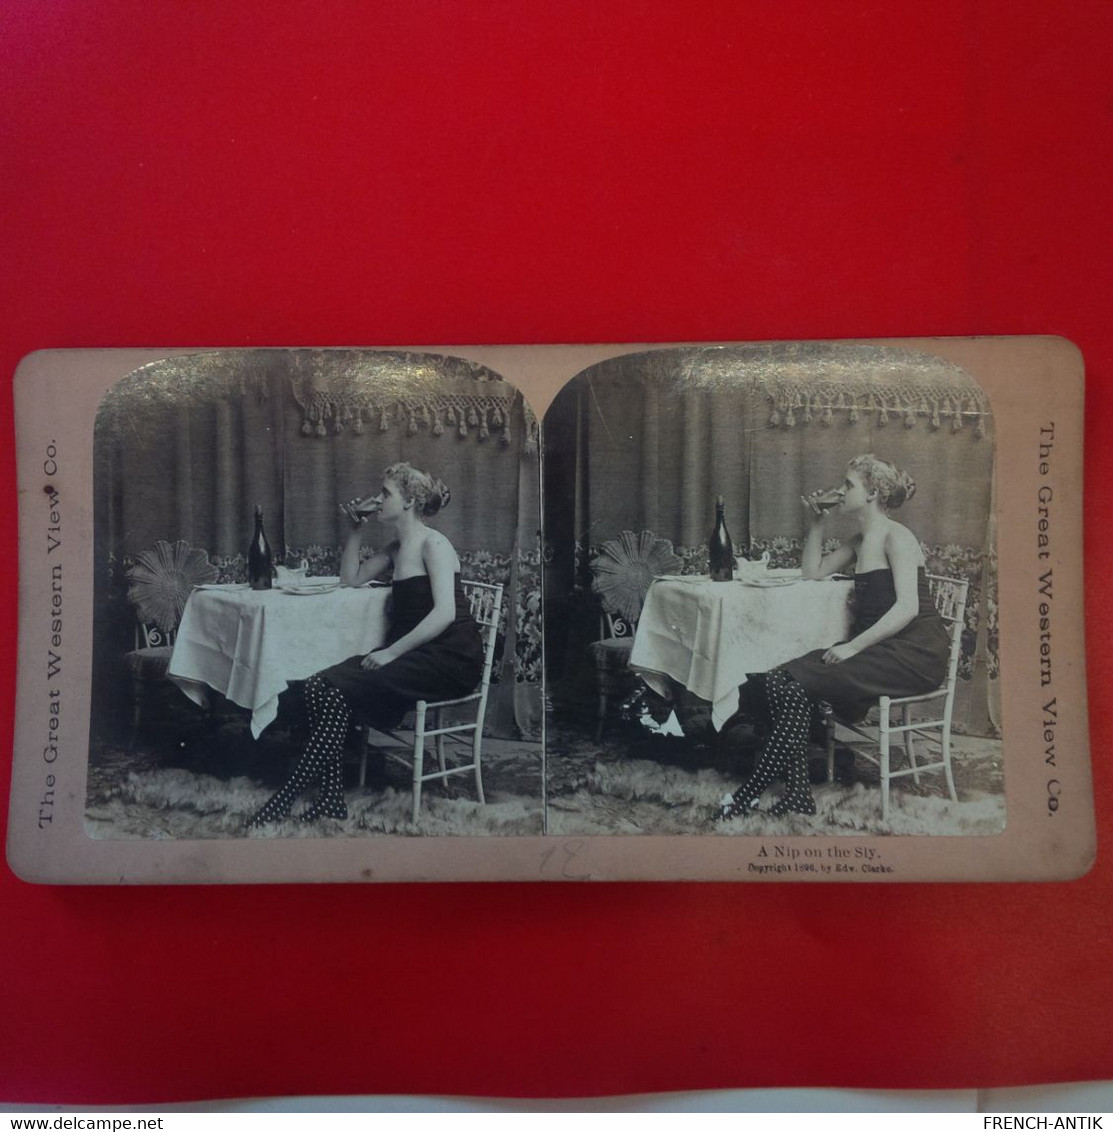 PHOTO STEREO A NIP ONT HE SLY - Stereo-Photographie